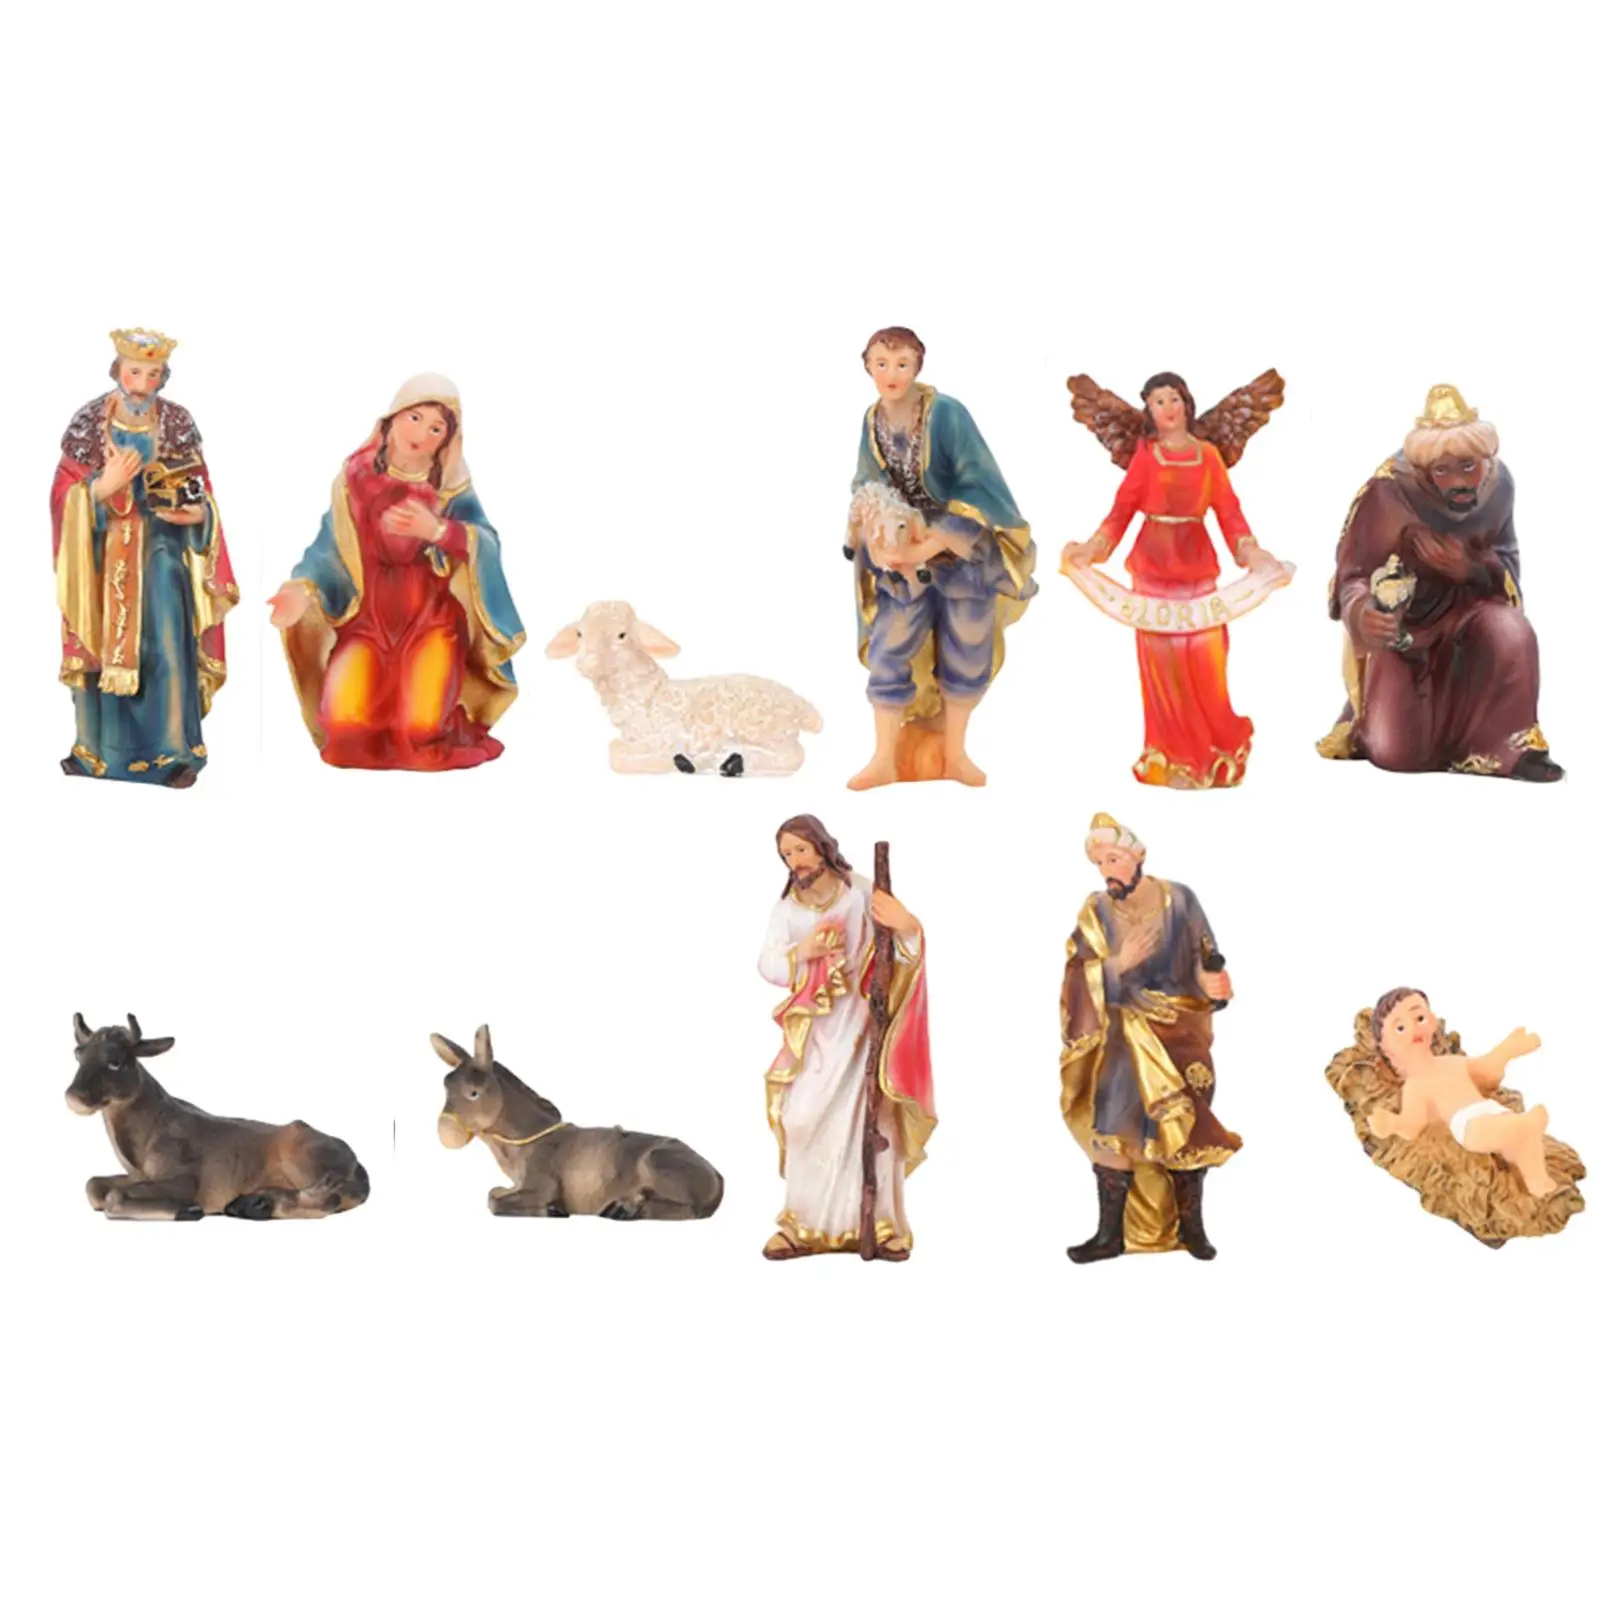 11 Pieces Nativity Scene Figurines Christmas Birth of Jesus Statue Set for Home Office Table Centerpiece Shelf Apartment